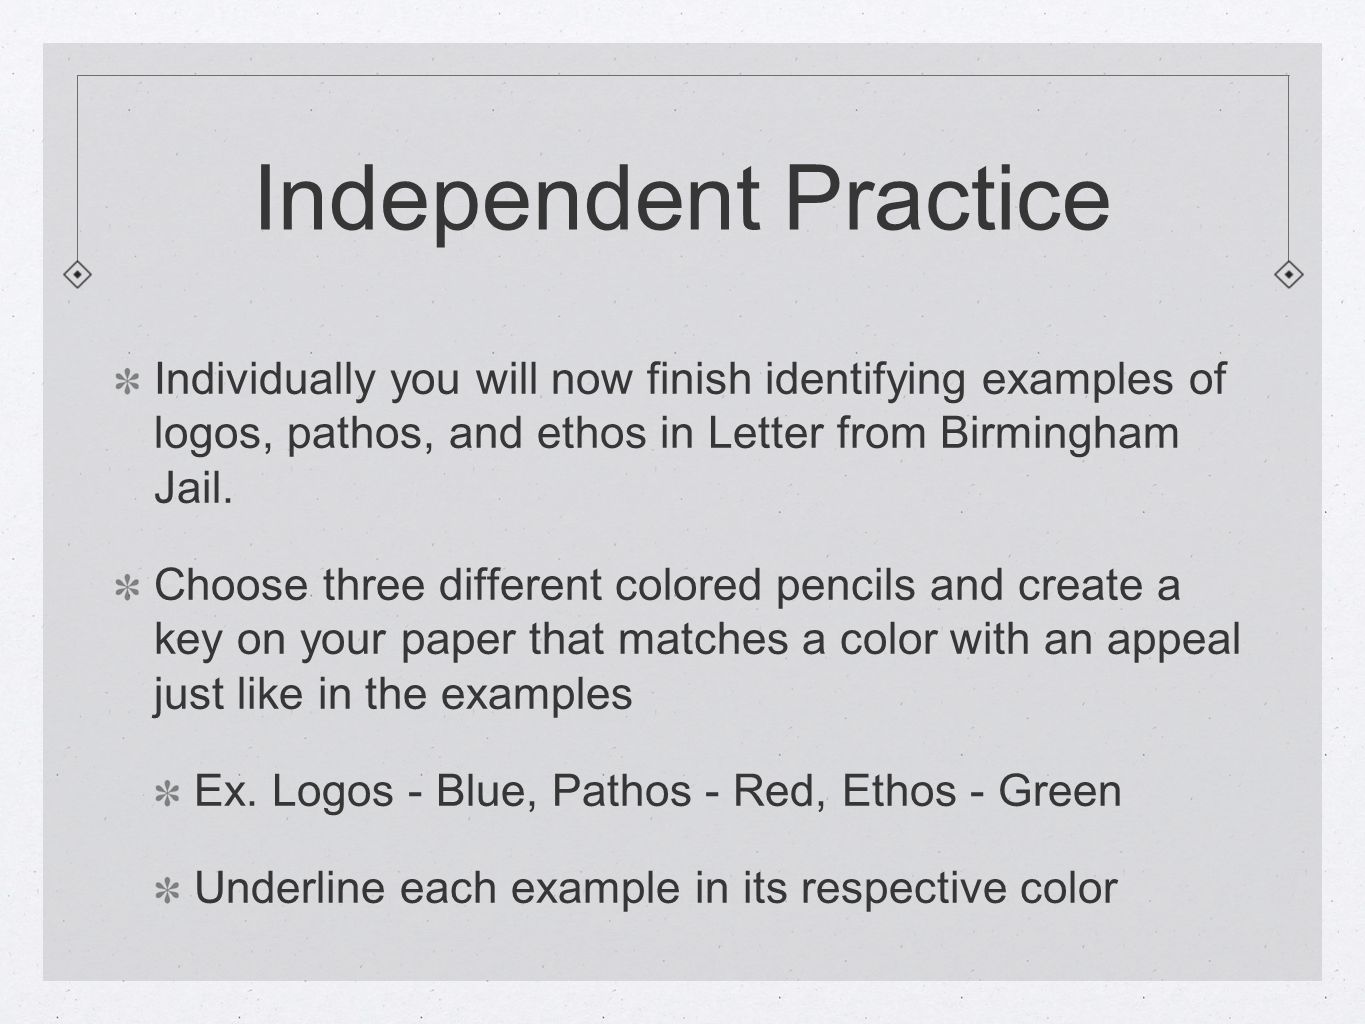 Independent Practice Individually you will now finish identifying examples of logos, pathos, and ethos in Letter from Birmingham Jail.